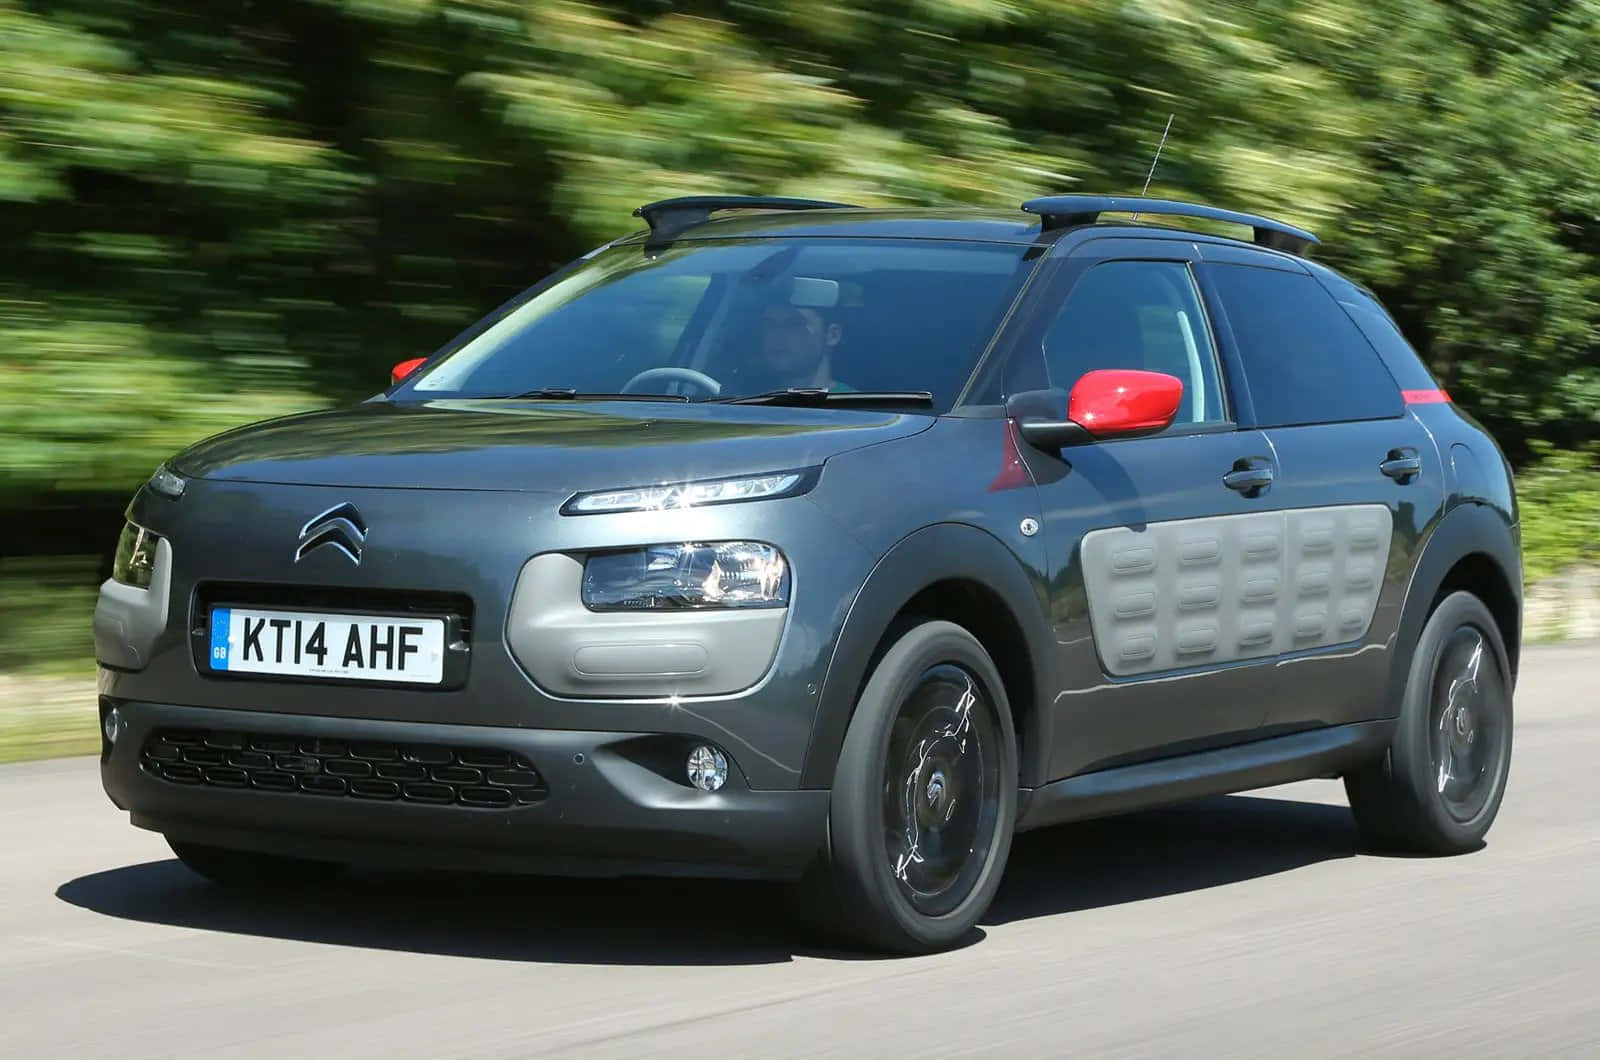 Customize Your Ride: Take a Look at Citroen's Wide Variety of Cars